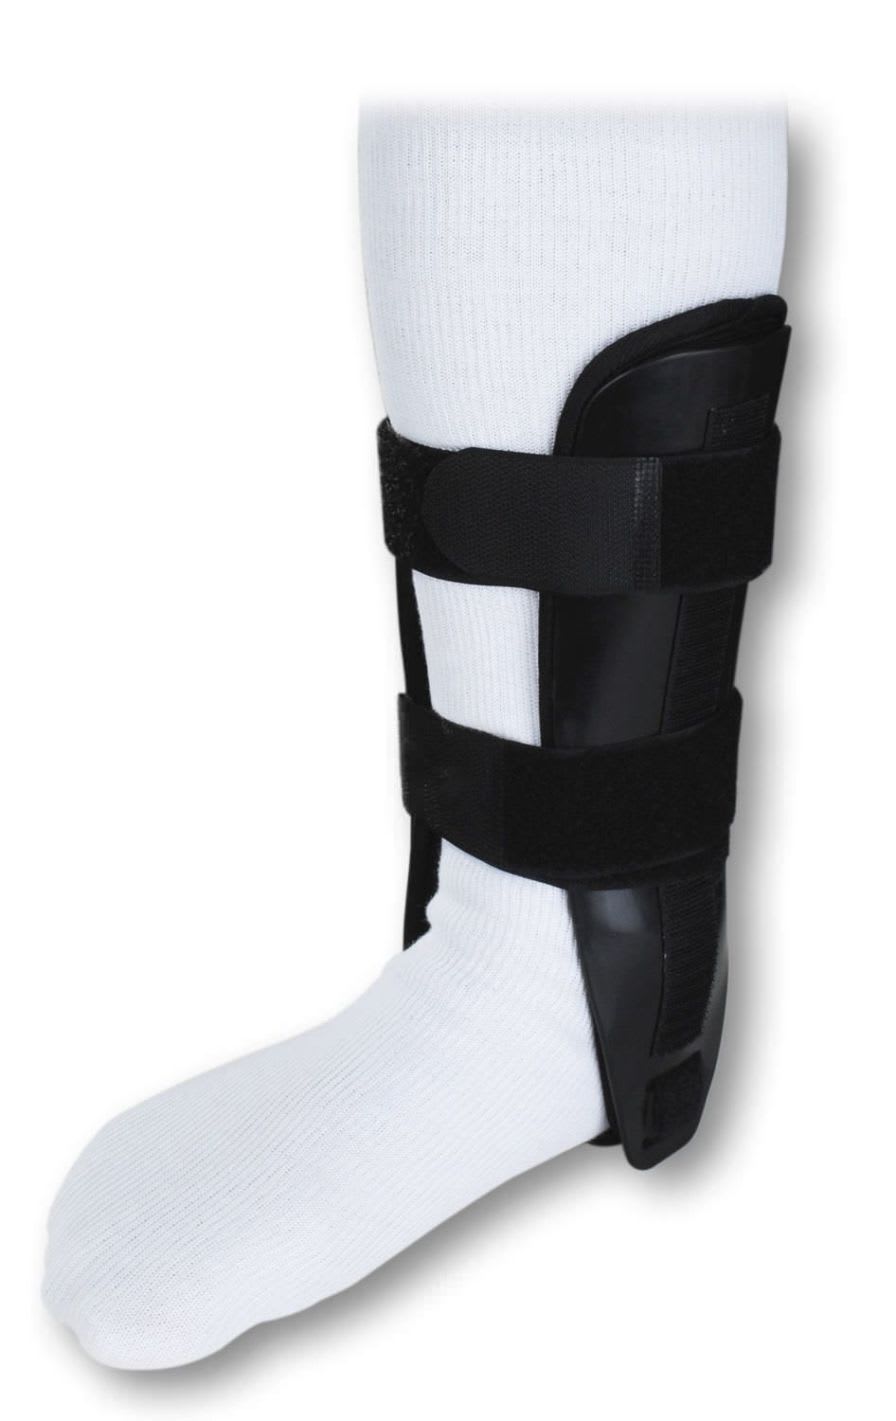 Ankle splint (orthopedic immobilization) Optec USA